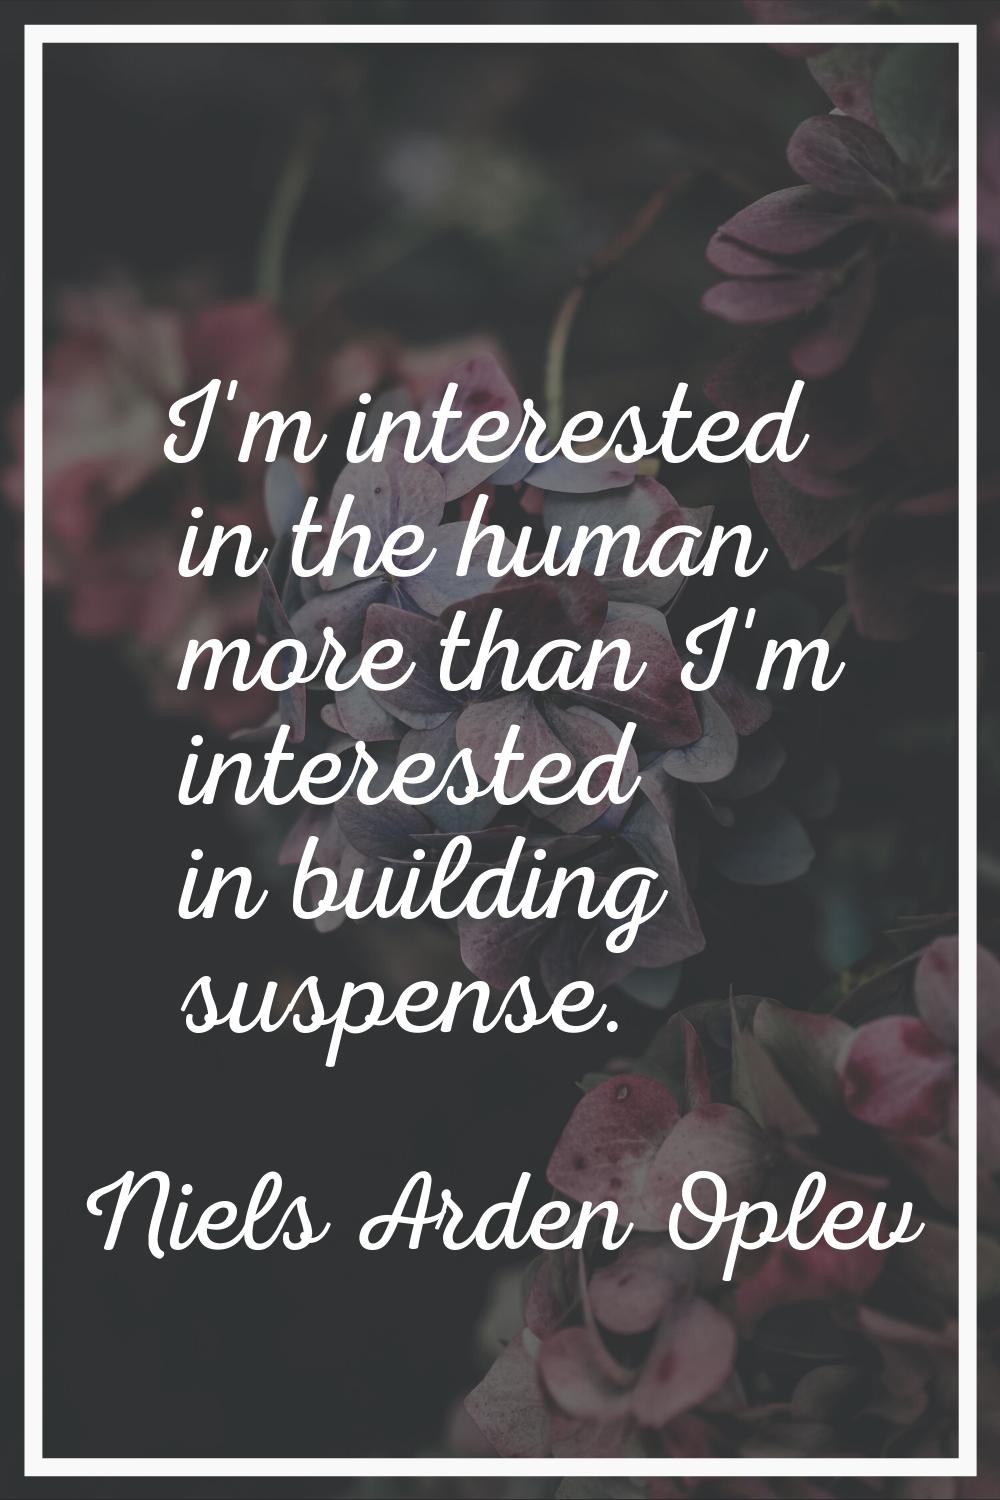 I'm interested in the human more than I'm interested in building suspense.